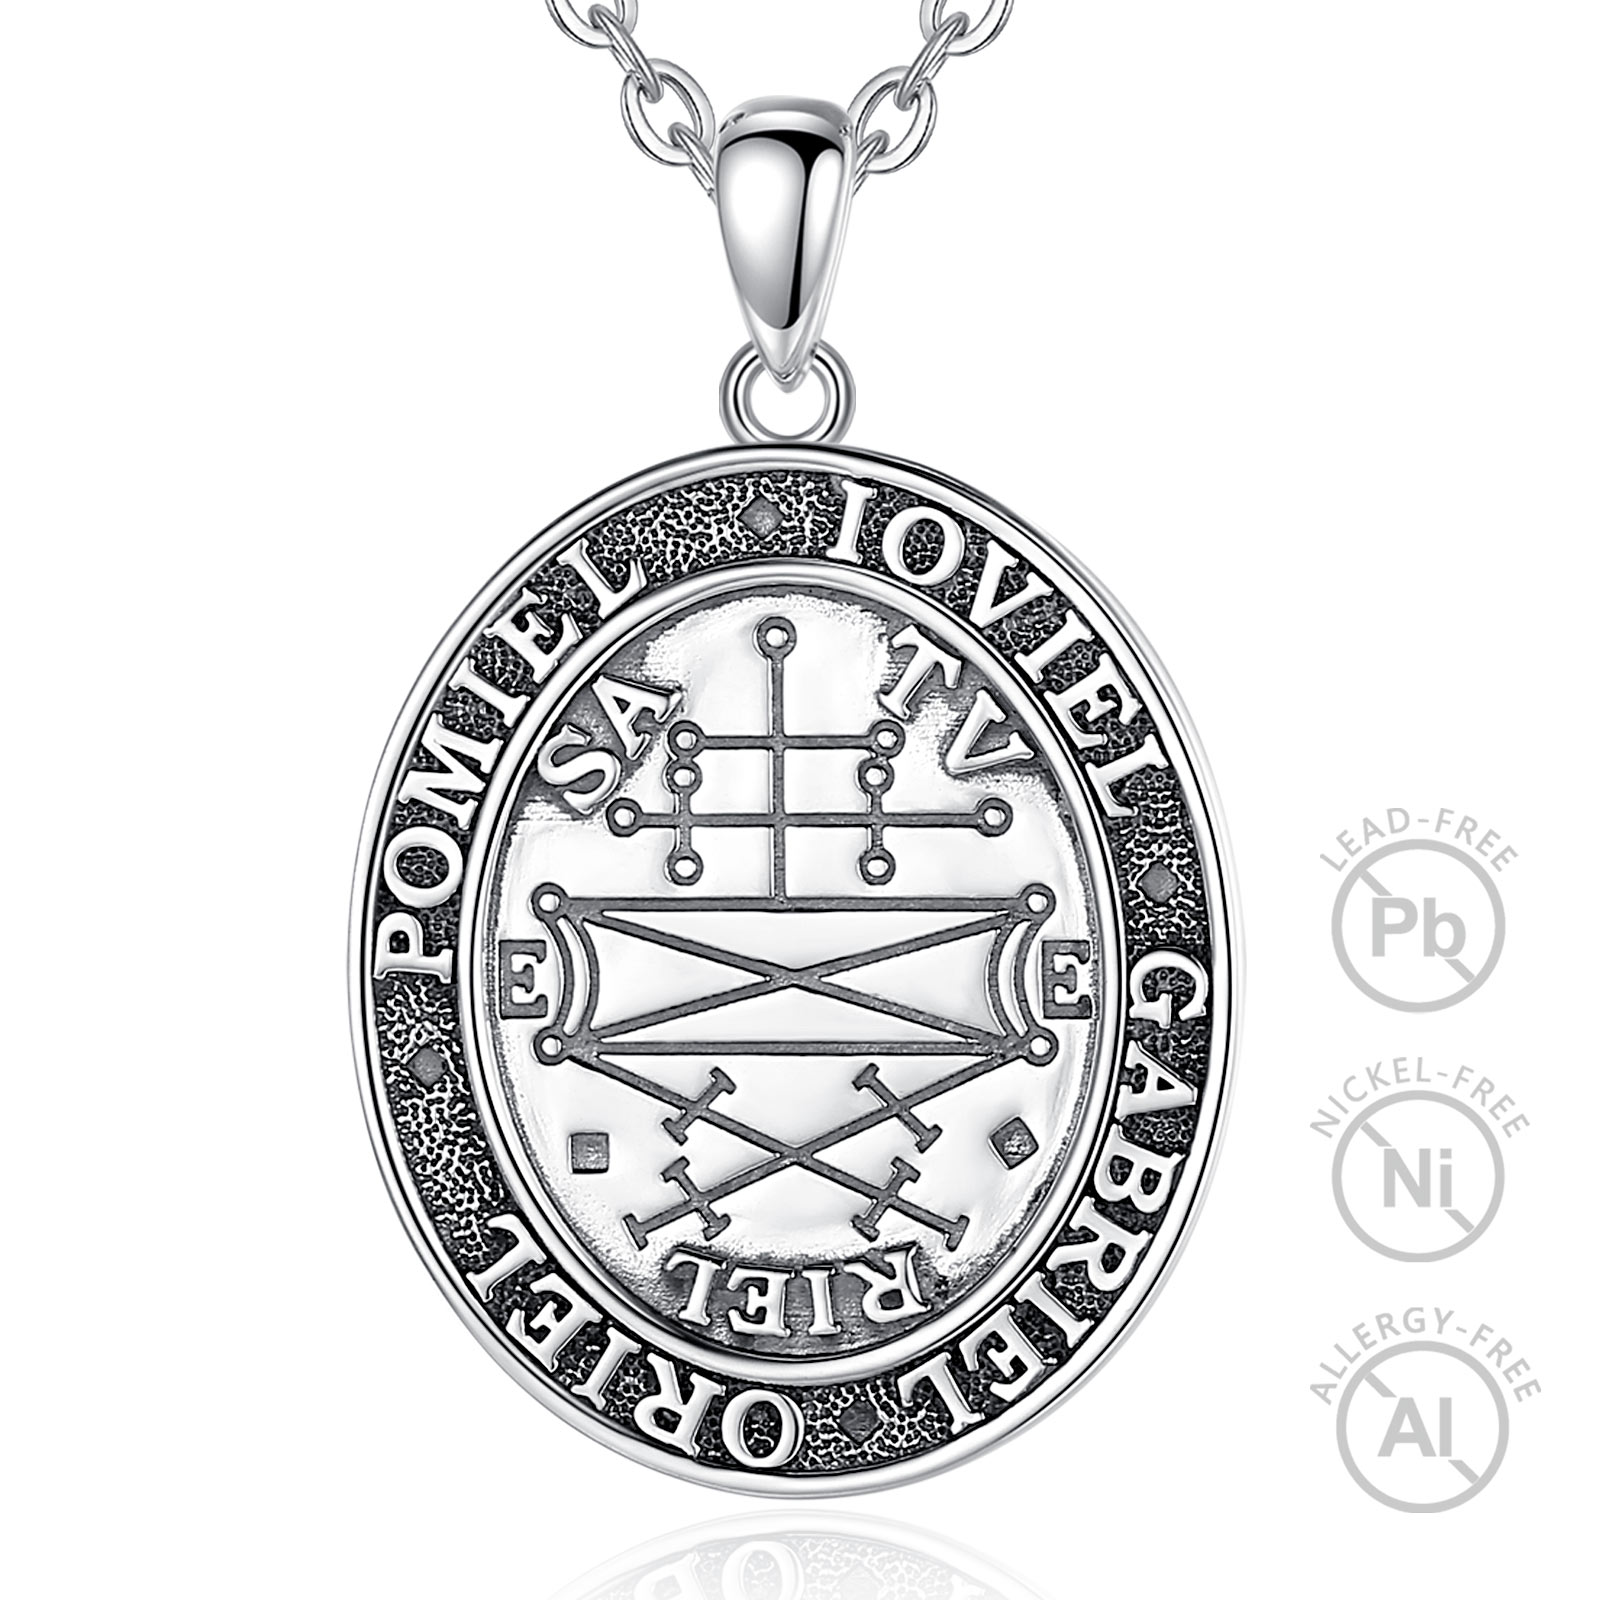 Merryshine 925 Sterling Silver Talisman Protection Good Spirits Design Exquisite Engraved Fine Jewelry Pendant Necklace for Men or Women